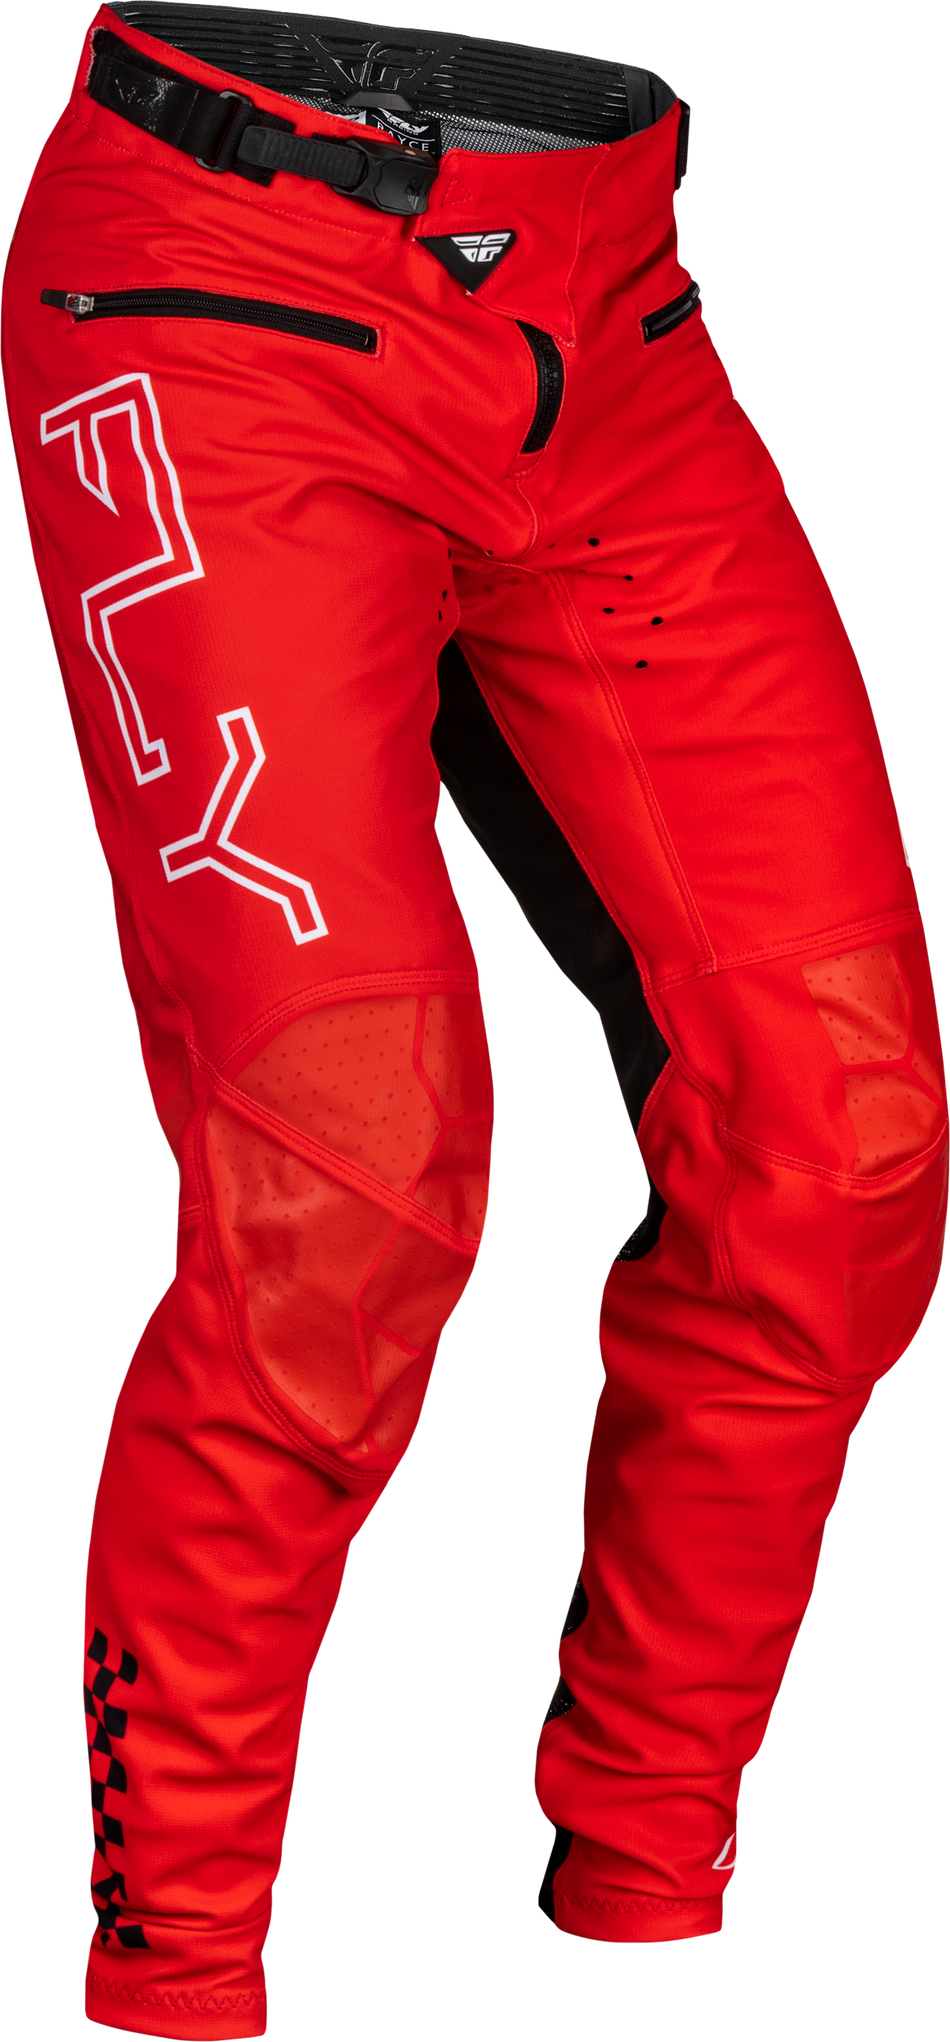 FLY RACING Youth Rayce Bicycle Pants Red Sz 26 377-06326